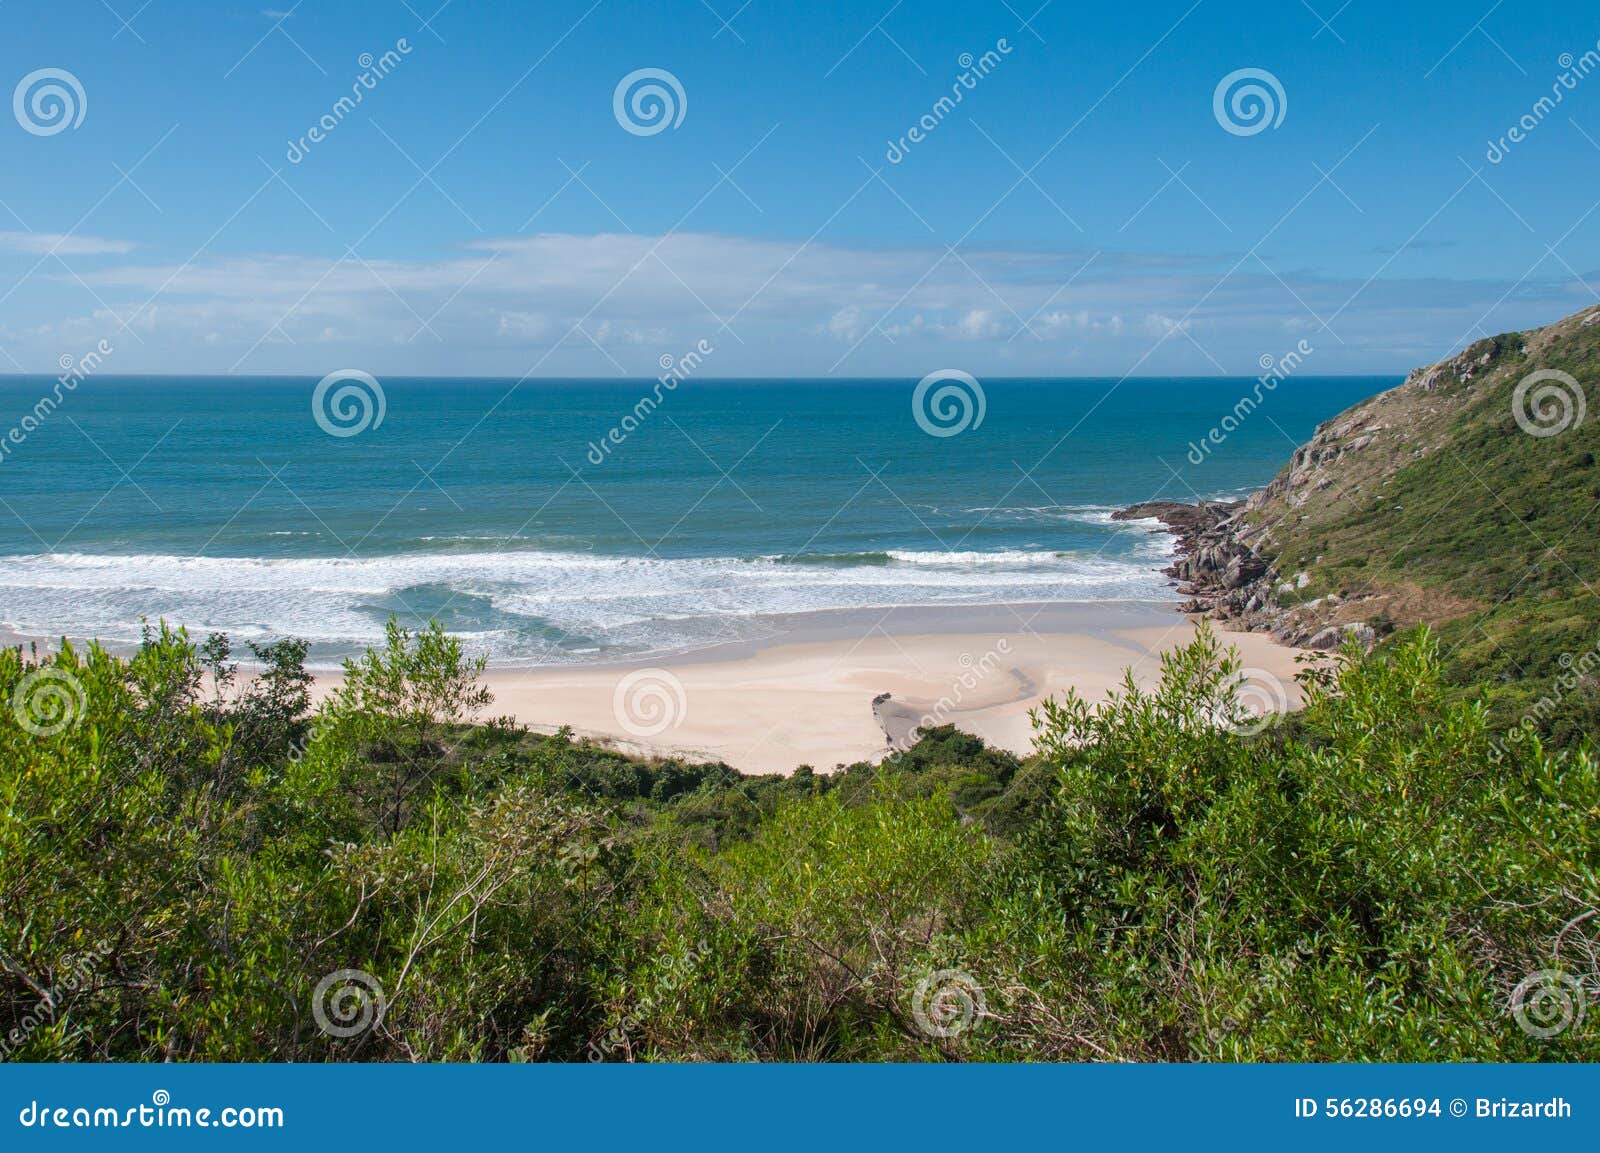 beaches in florianopolis island, in south brazil